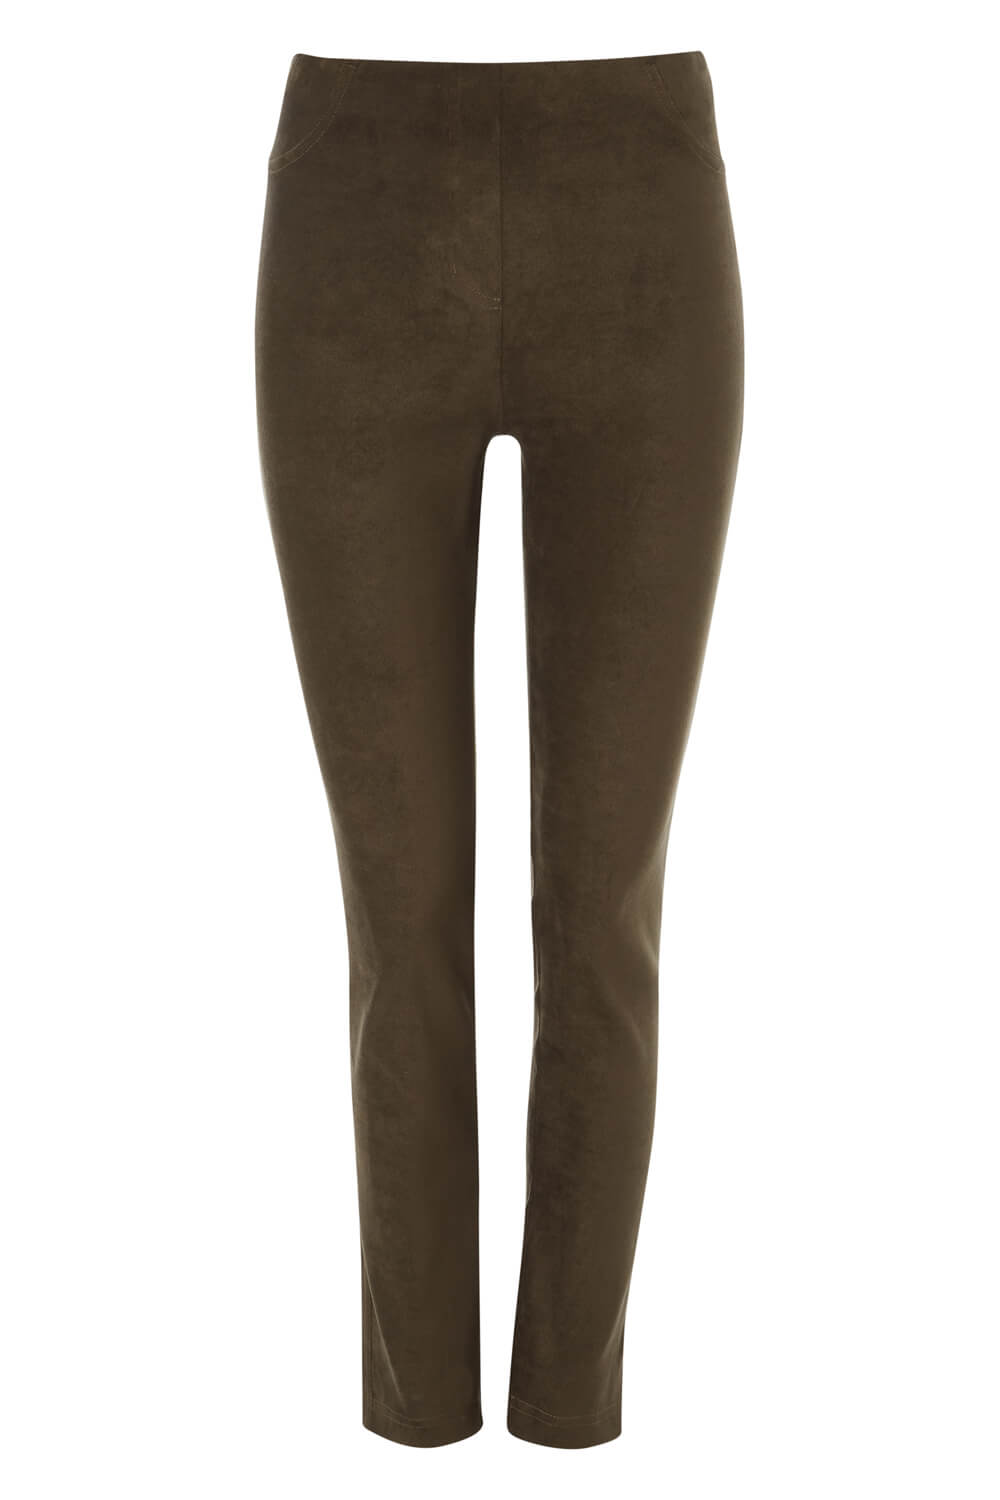 KHAKI Full Length Suedette Stretch Trousers, Image 5 of 5